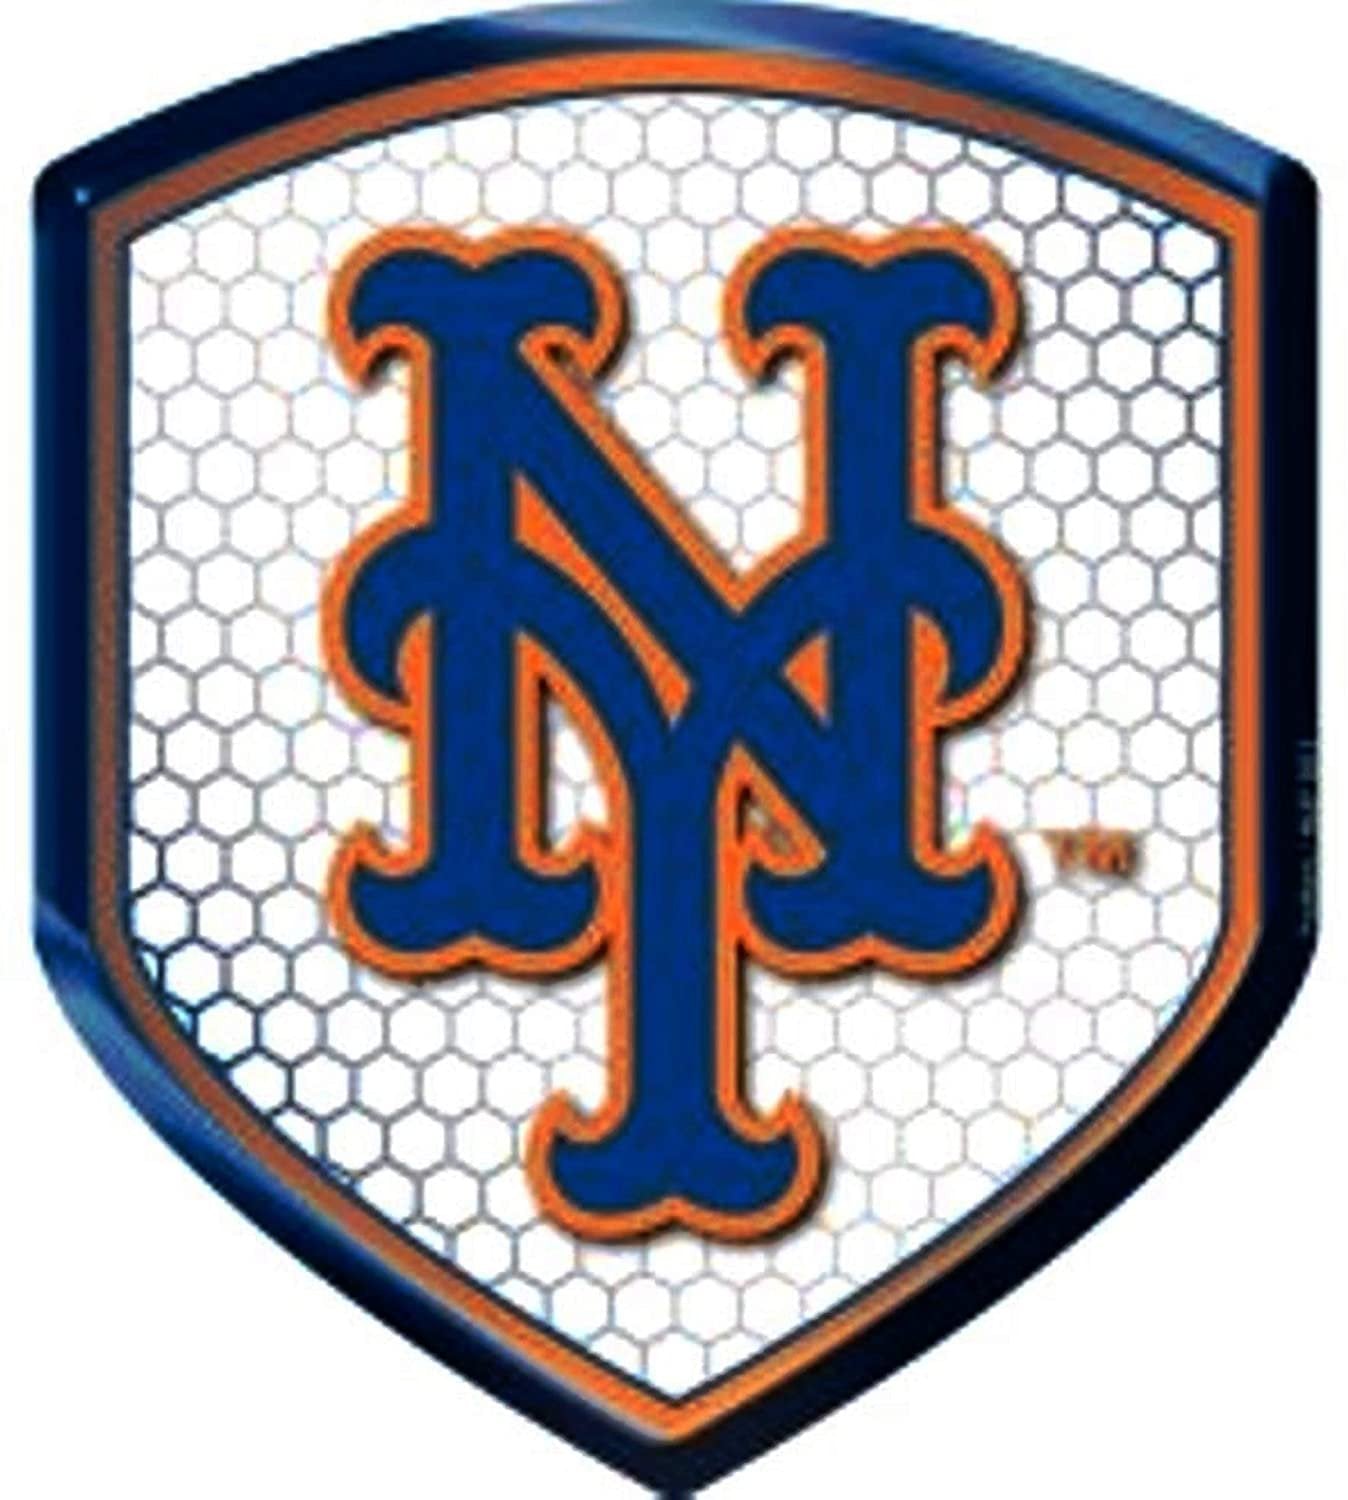 New York Mets High Intensity Reflector, Shield Shape, Raised Decal Sticker, 2.5x3.5 Inch, Home or Auto, Full Adhesive Backing